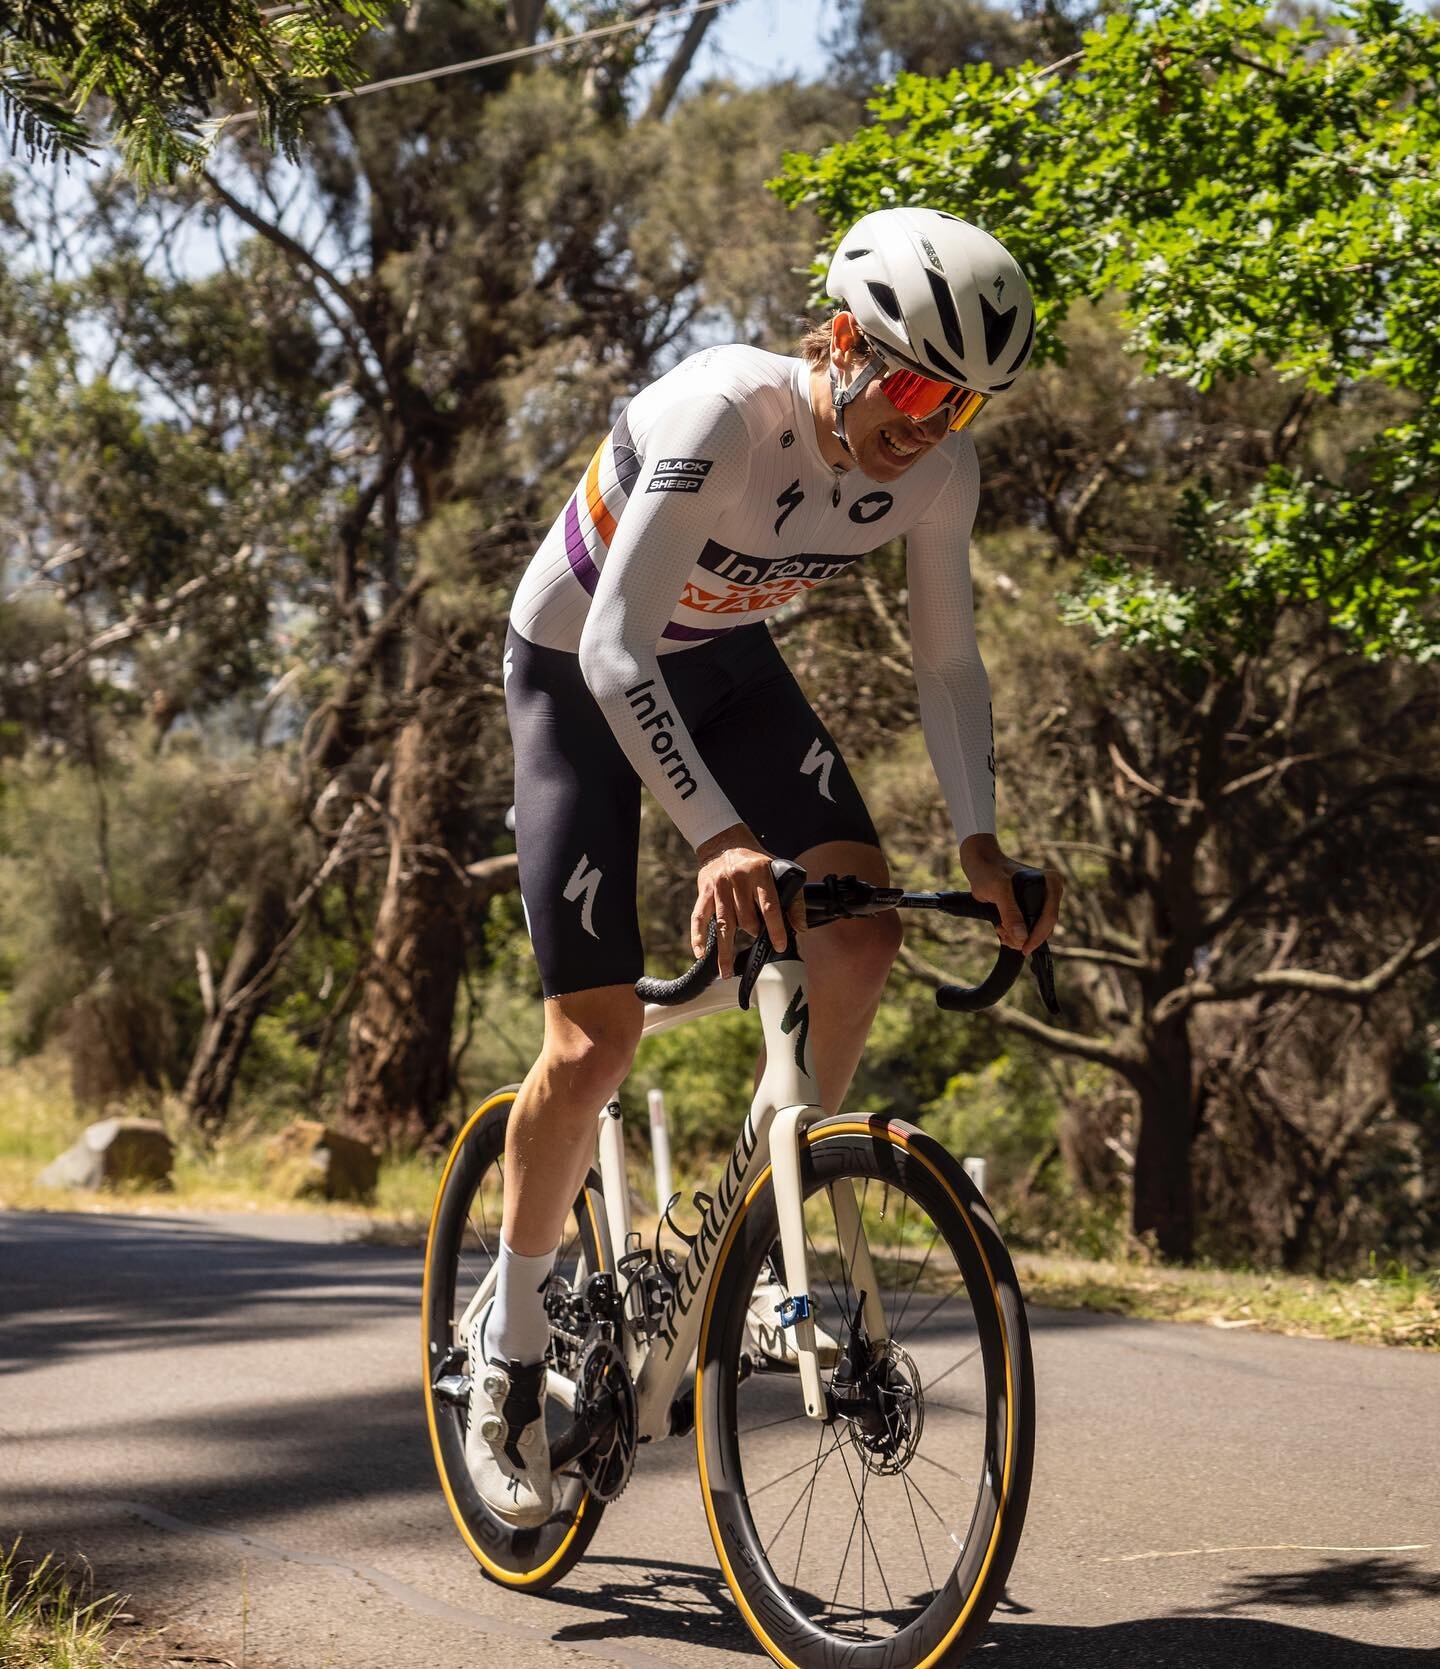 The prologue may have been short, but it was not so sweet. A tough start to the Tour of Tasmania! 600m at 12%, it wasn&rsquo;t for the faint hearted. Our best finisher was @elliotschultz_  in 7th, the rest of the team within seconds behind. Now onto 